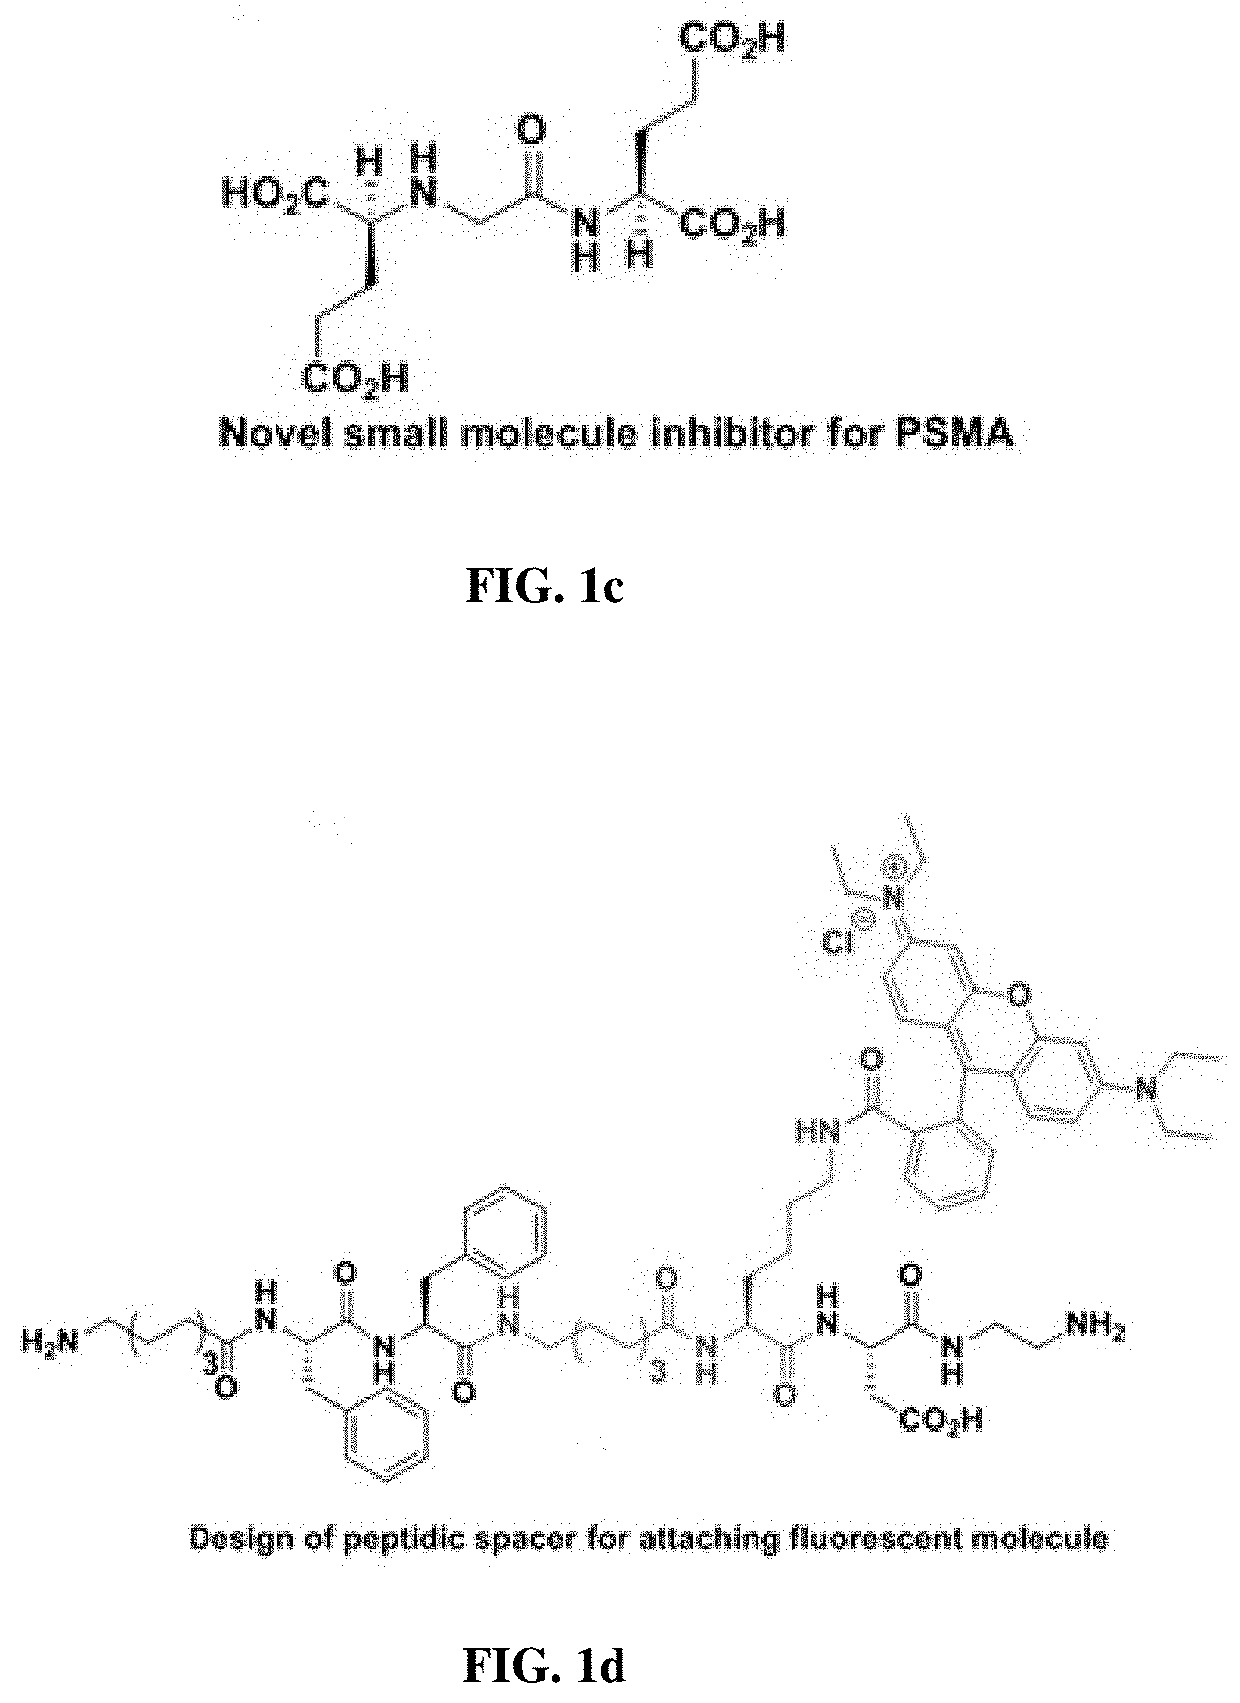 Small molecule inhibitors for early diagnosis of prostate specific membrane antigen cancers and neurodegenerative diseases